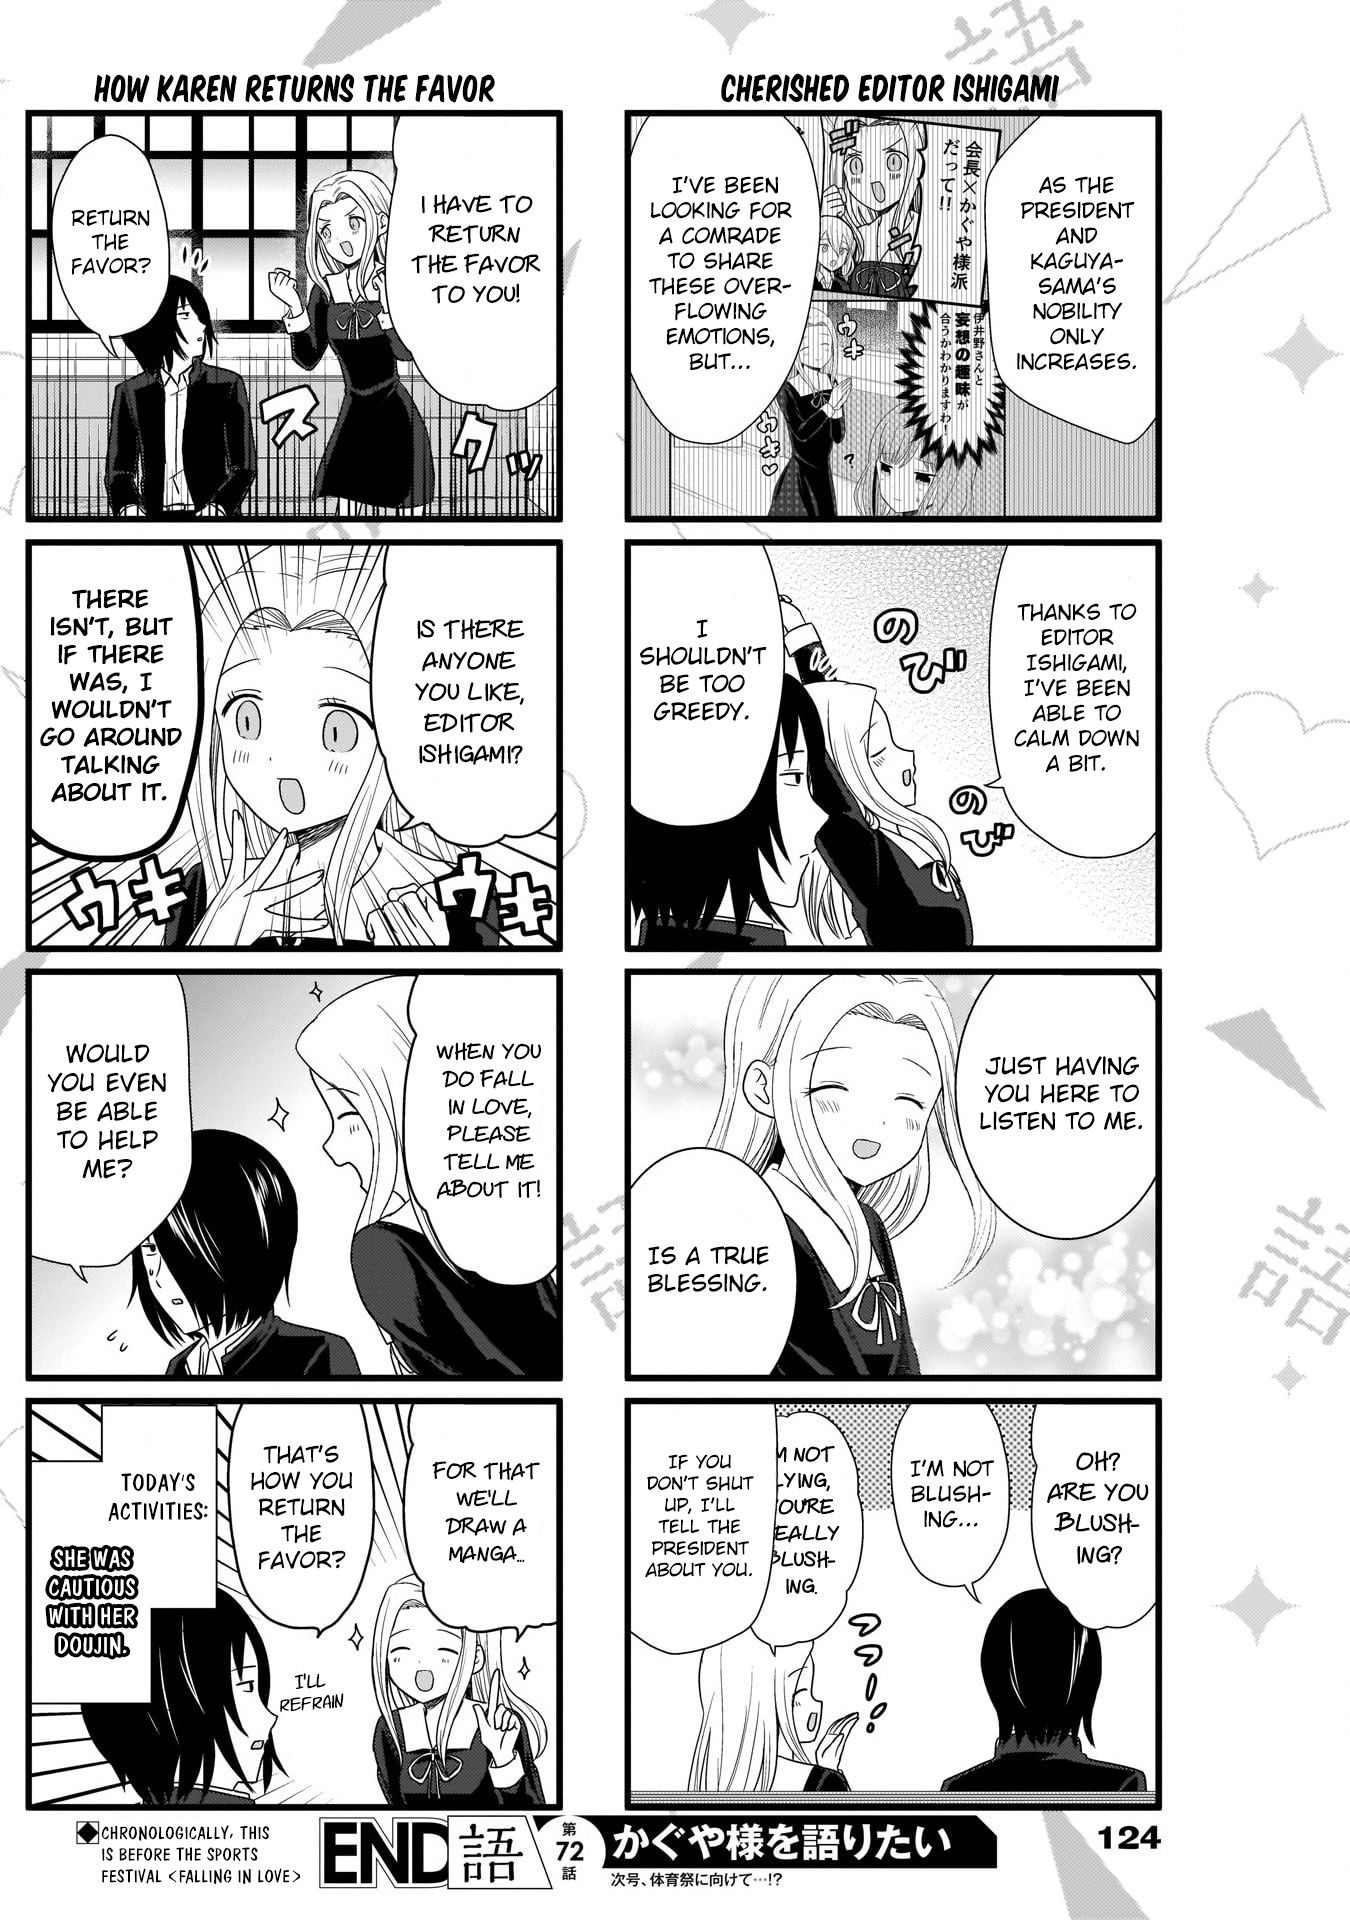 we_want_to_talk_about_kaguya_72_5